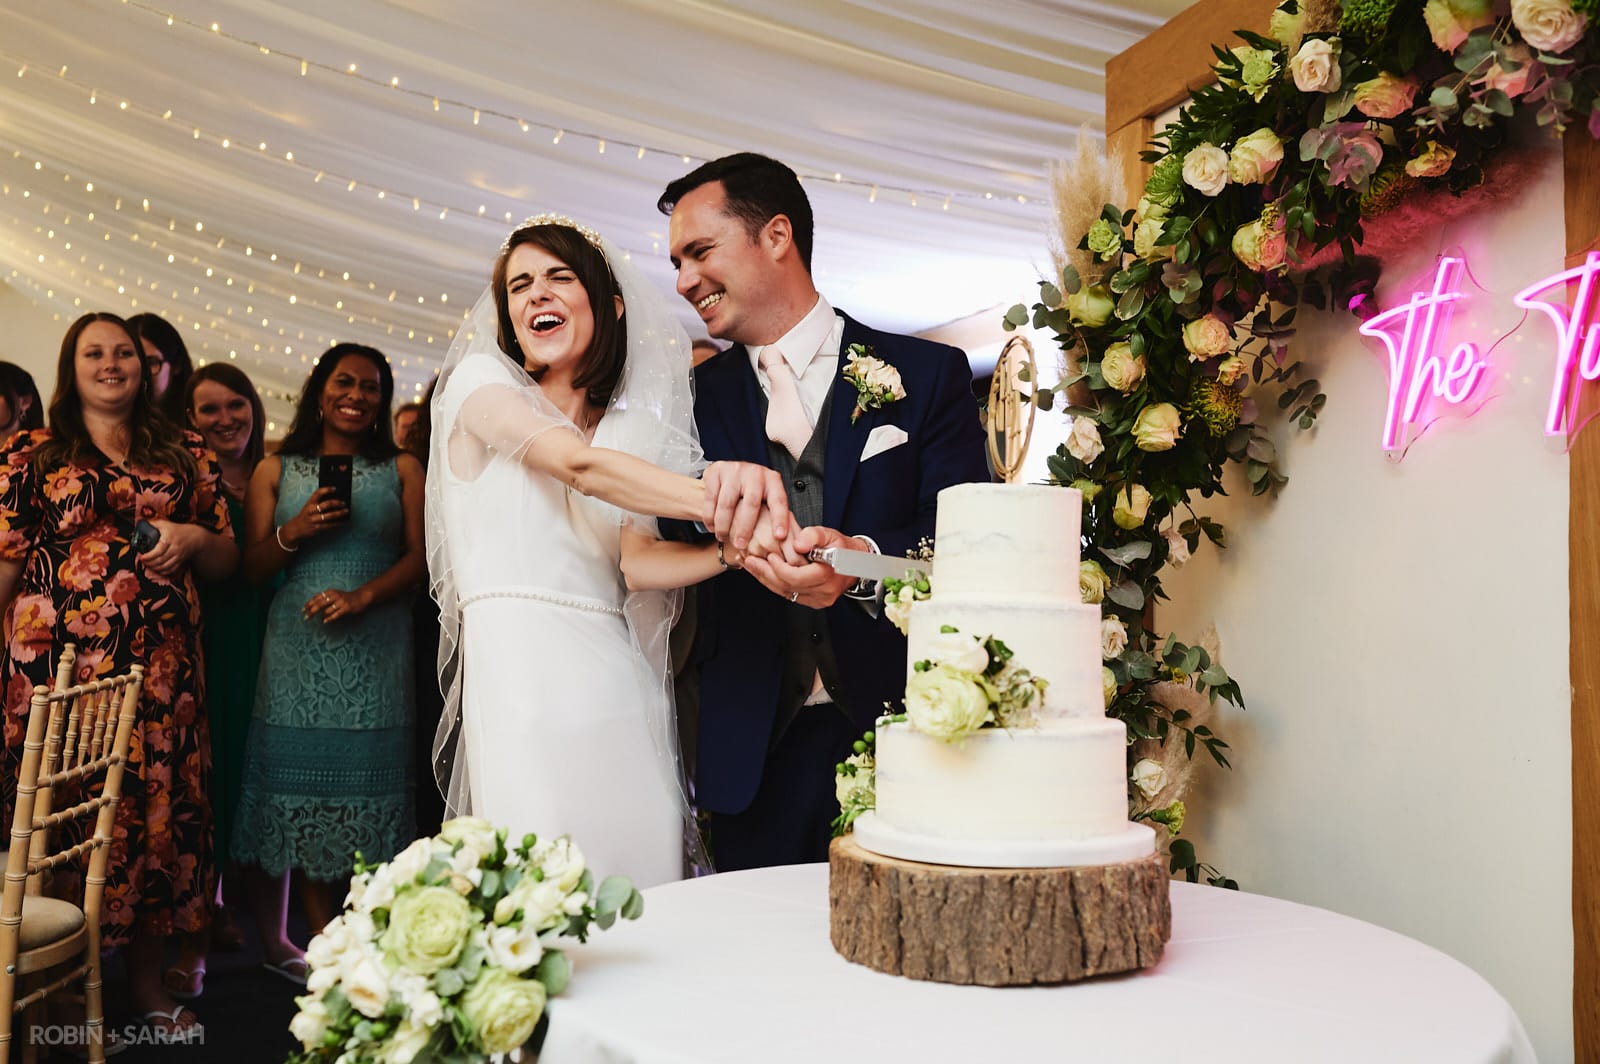 Bride and groom cut wedding cake as guests watch and take photos